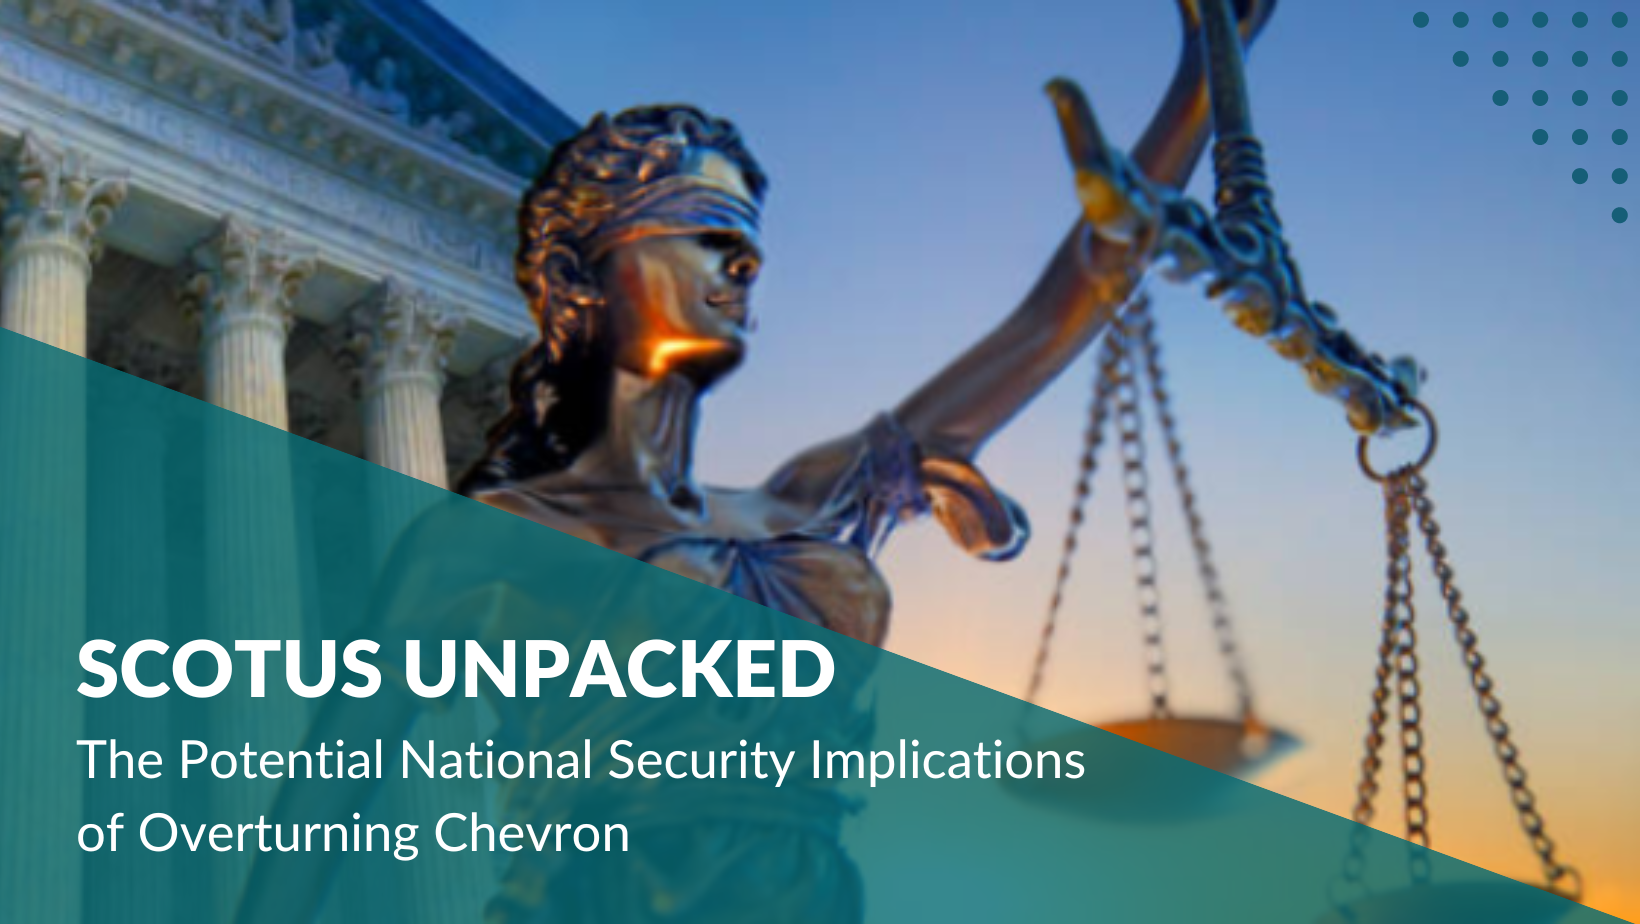 SCOTUS UNPACKED: The Potential National Security Implications of Overturning Chevron